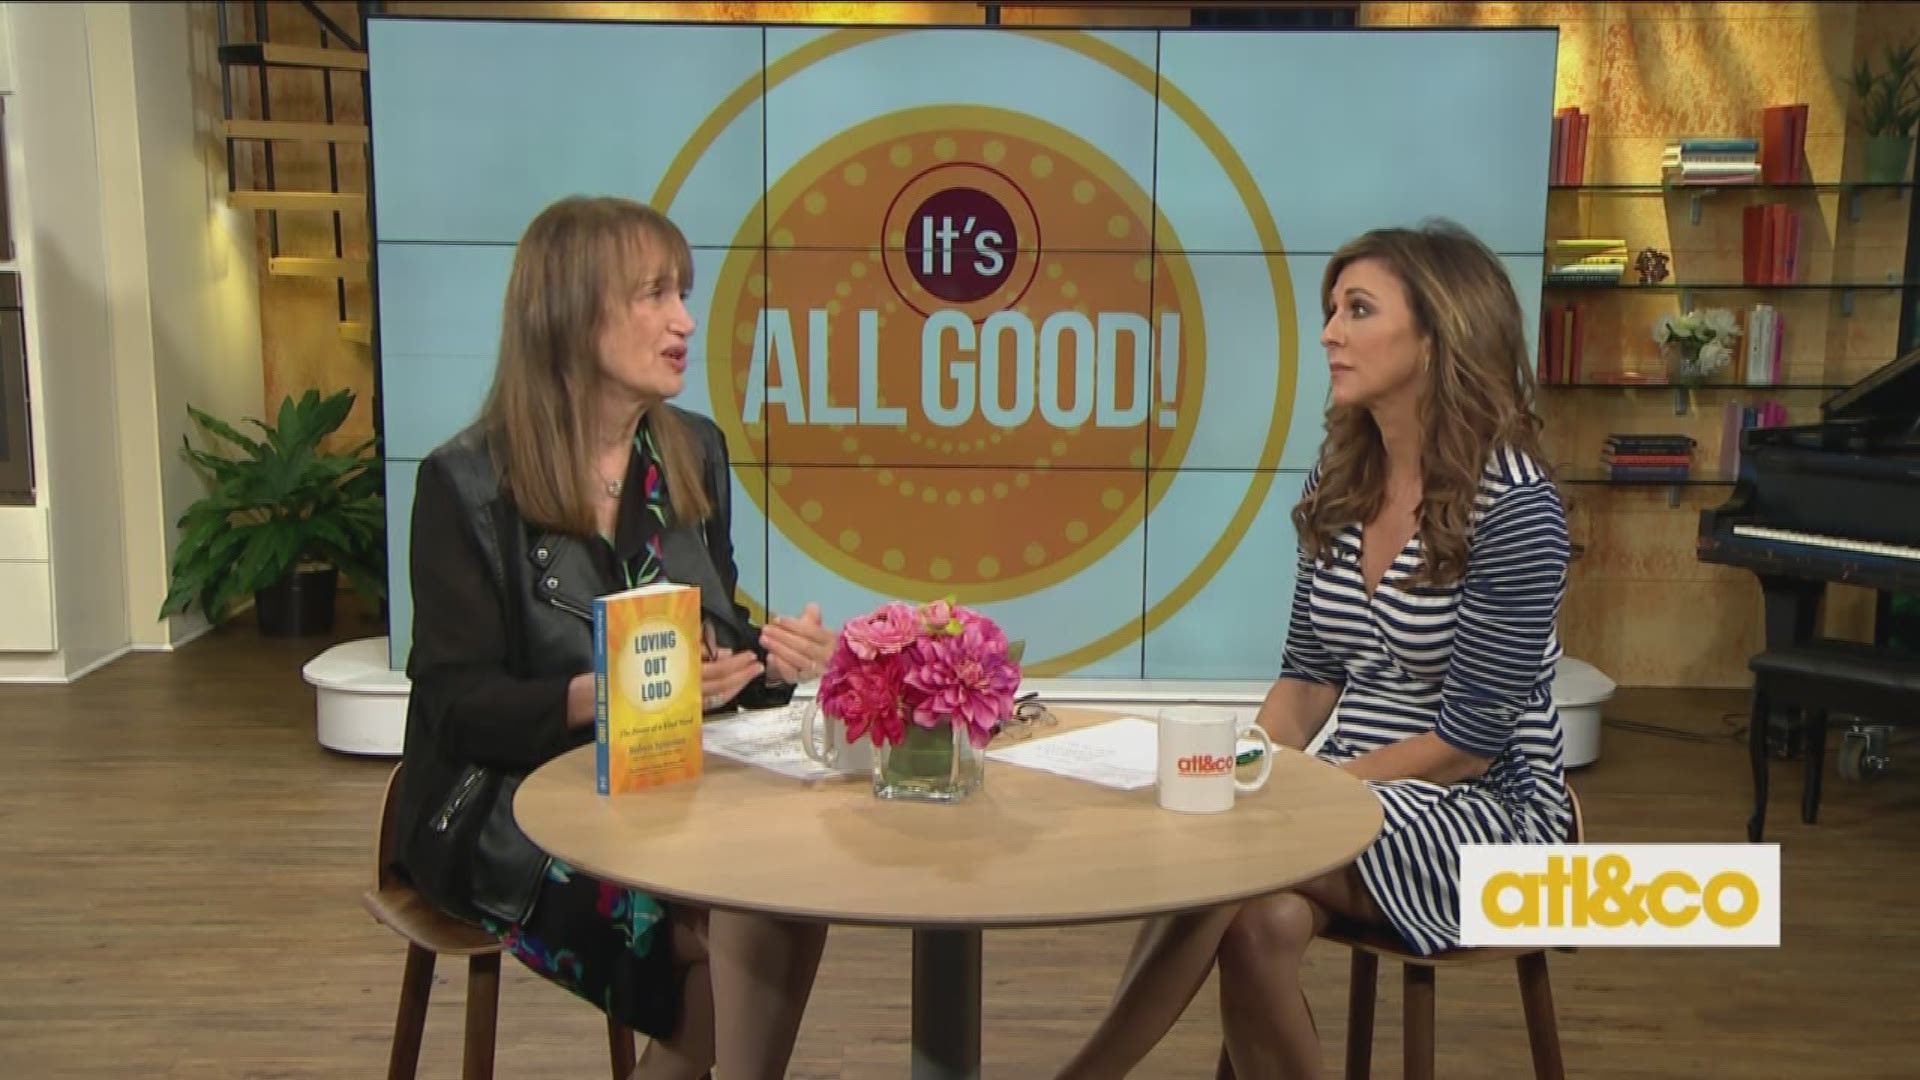 Monday Mindfulness! NY Times Bestselling Author Robyn Spizman shares heartwarming stories on A&C and previews her new book 'Loving Out Loud: The Power of a Kind Word'